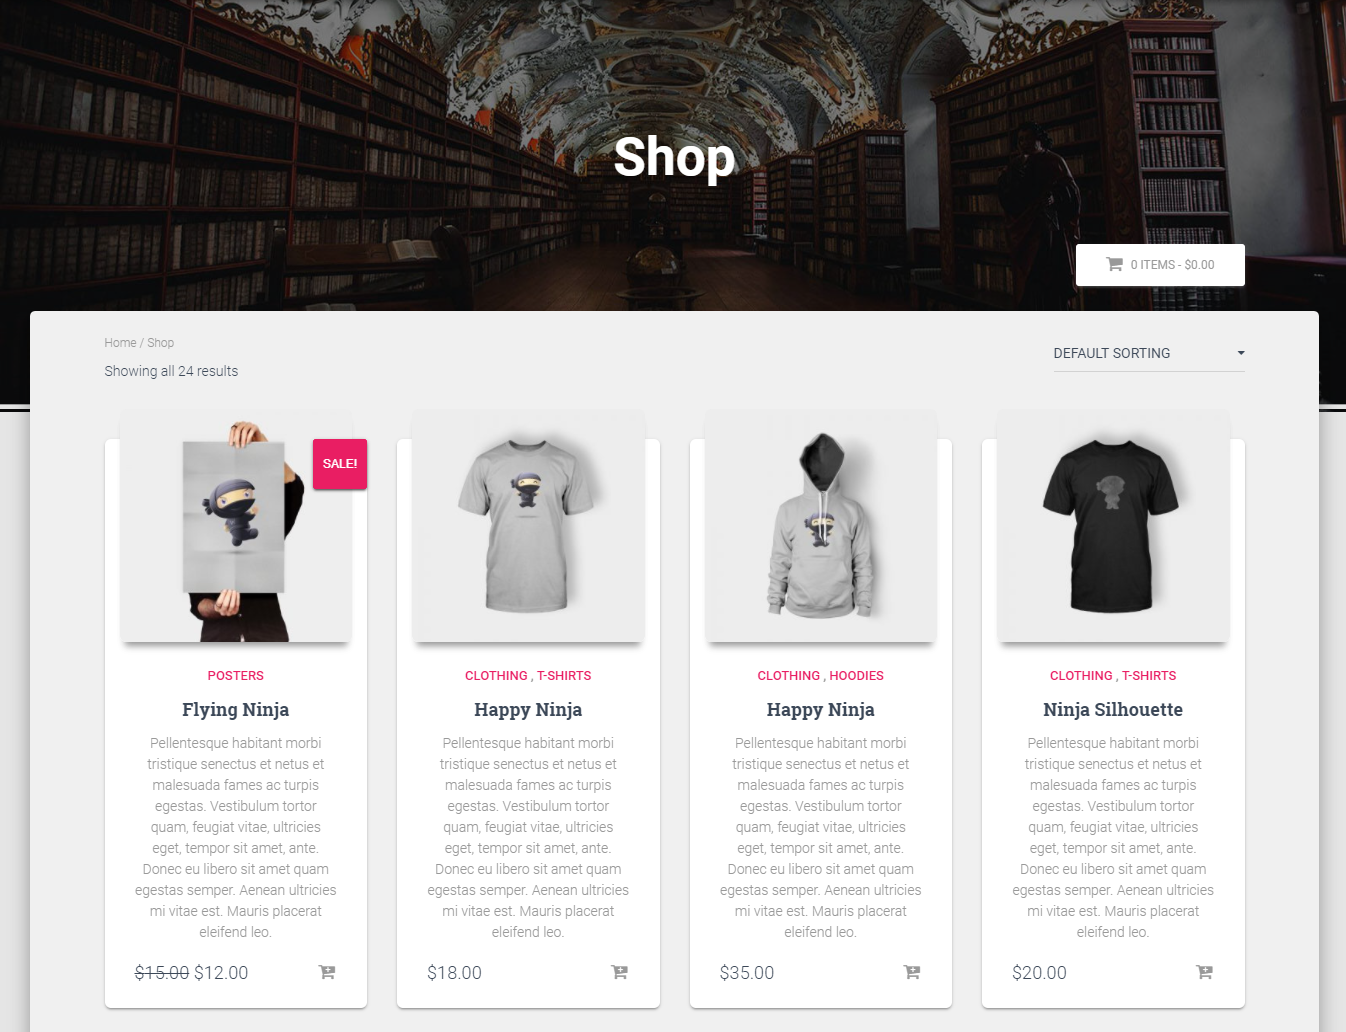 The shop page is quite beautifully presented in Hestia